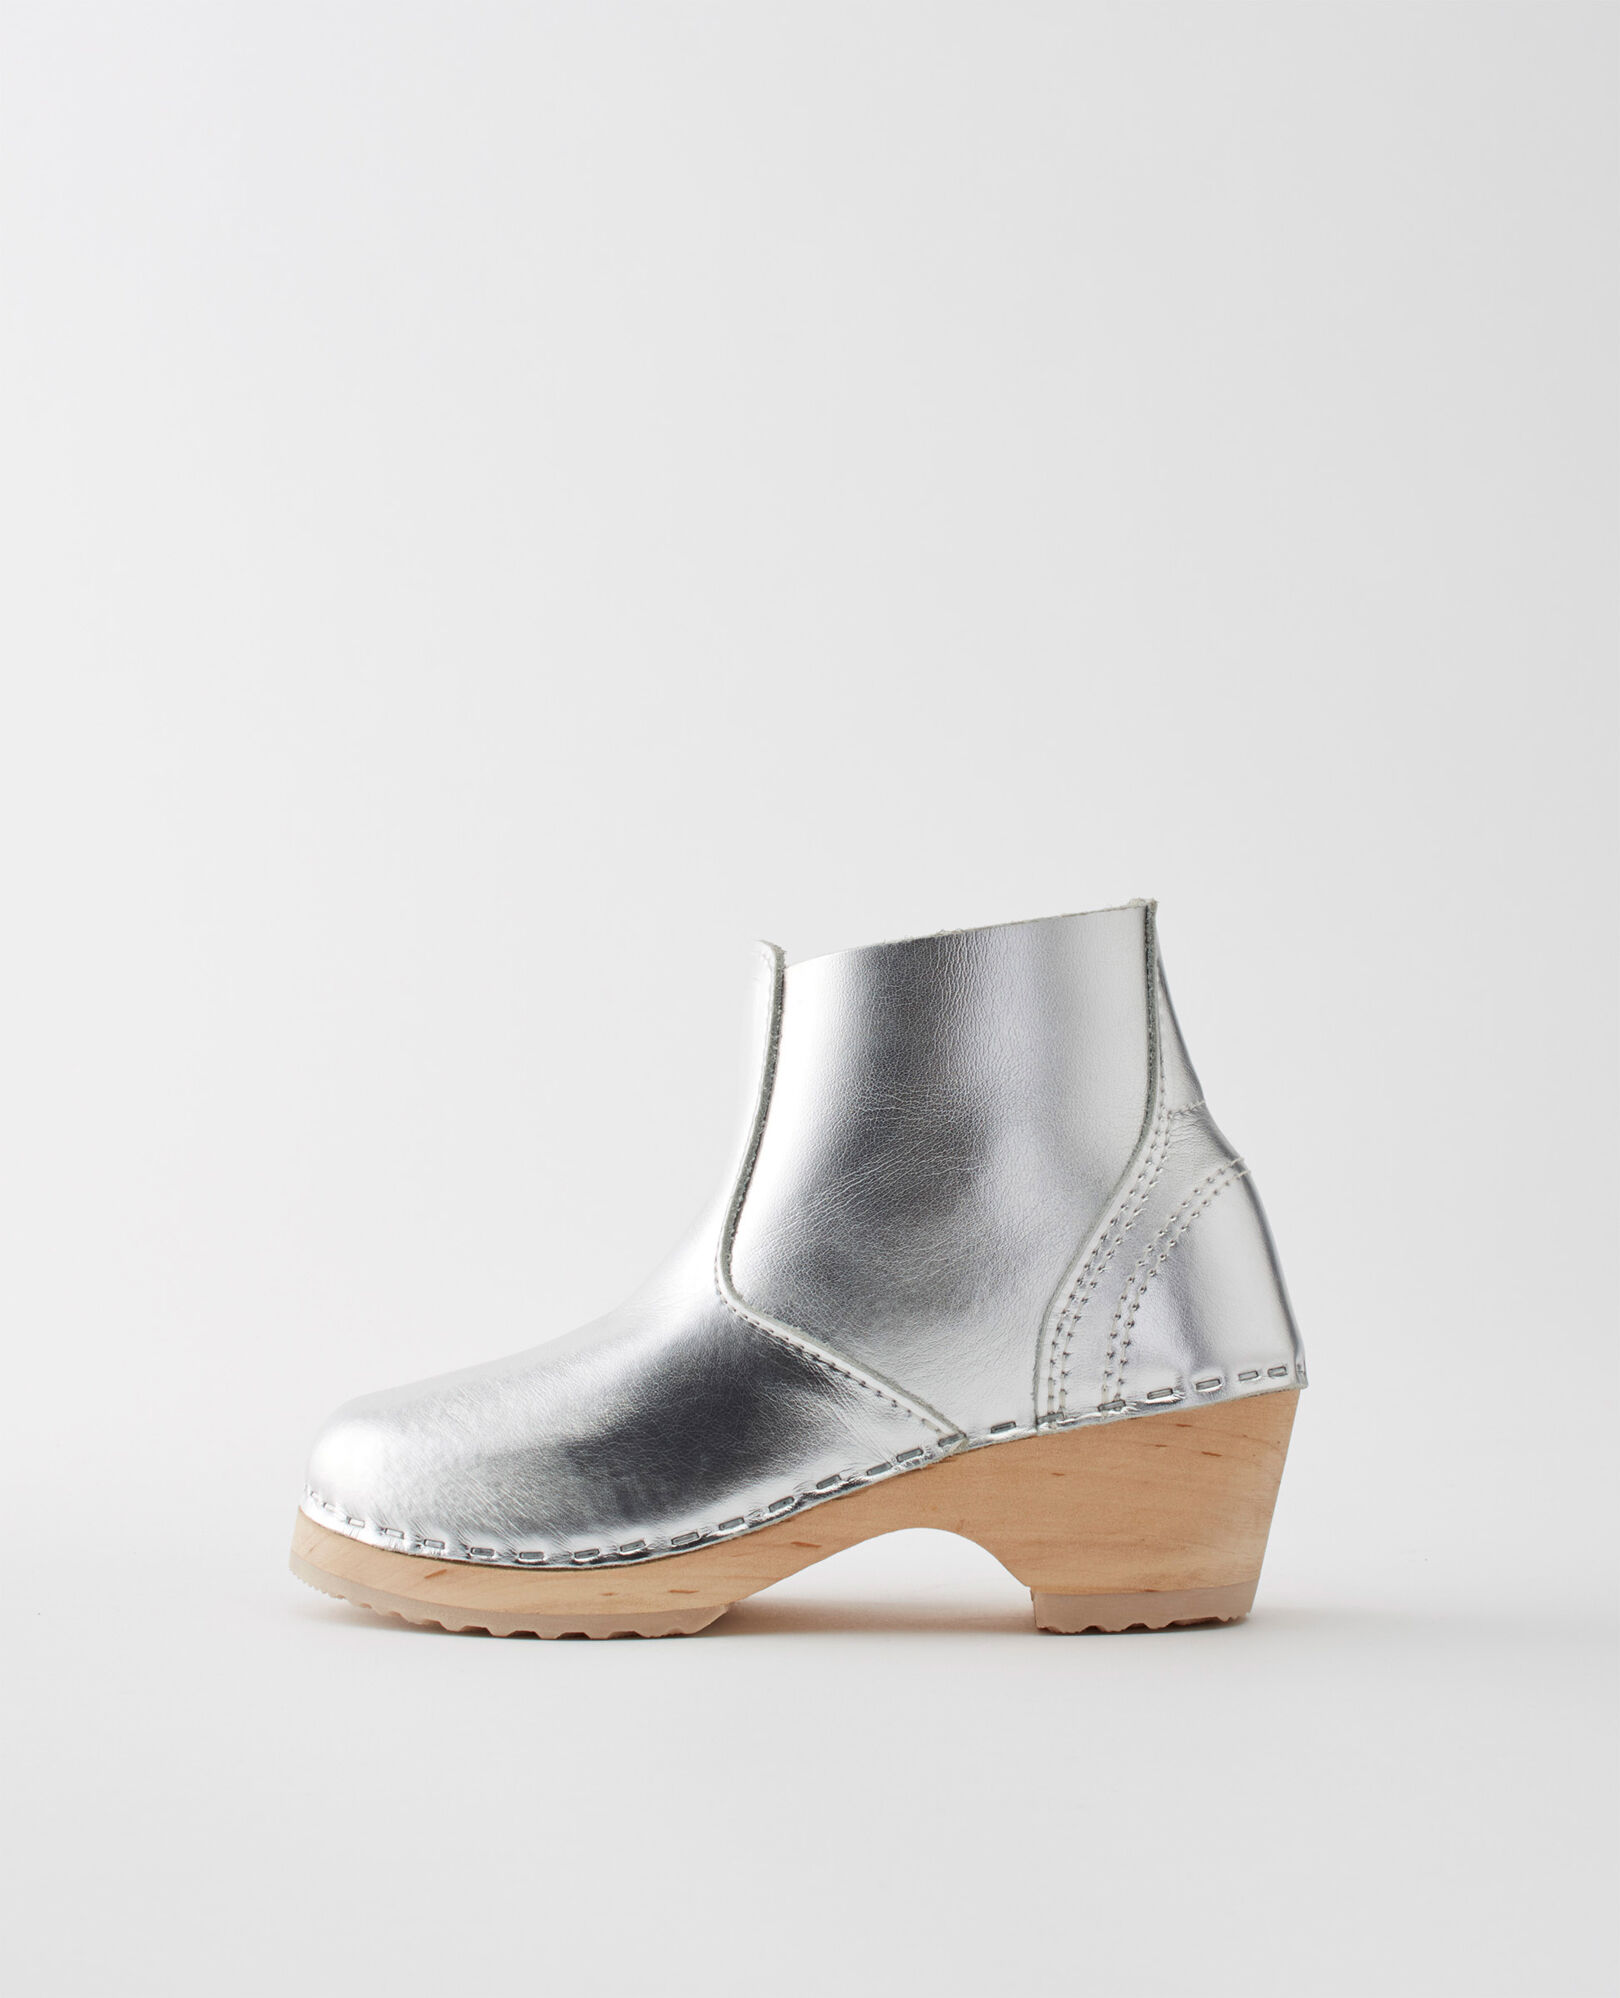 hanna andersson clog boots